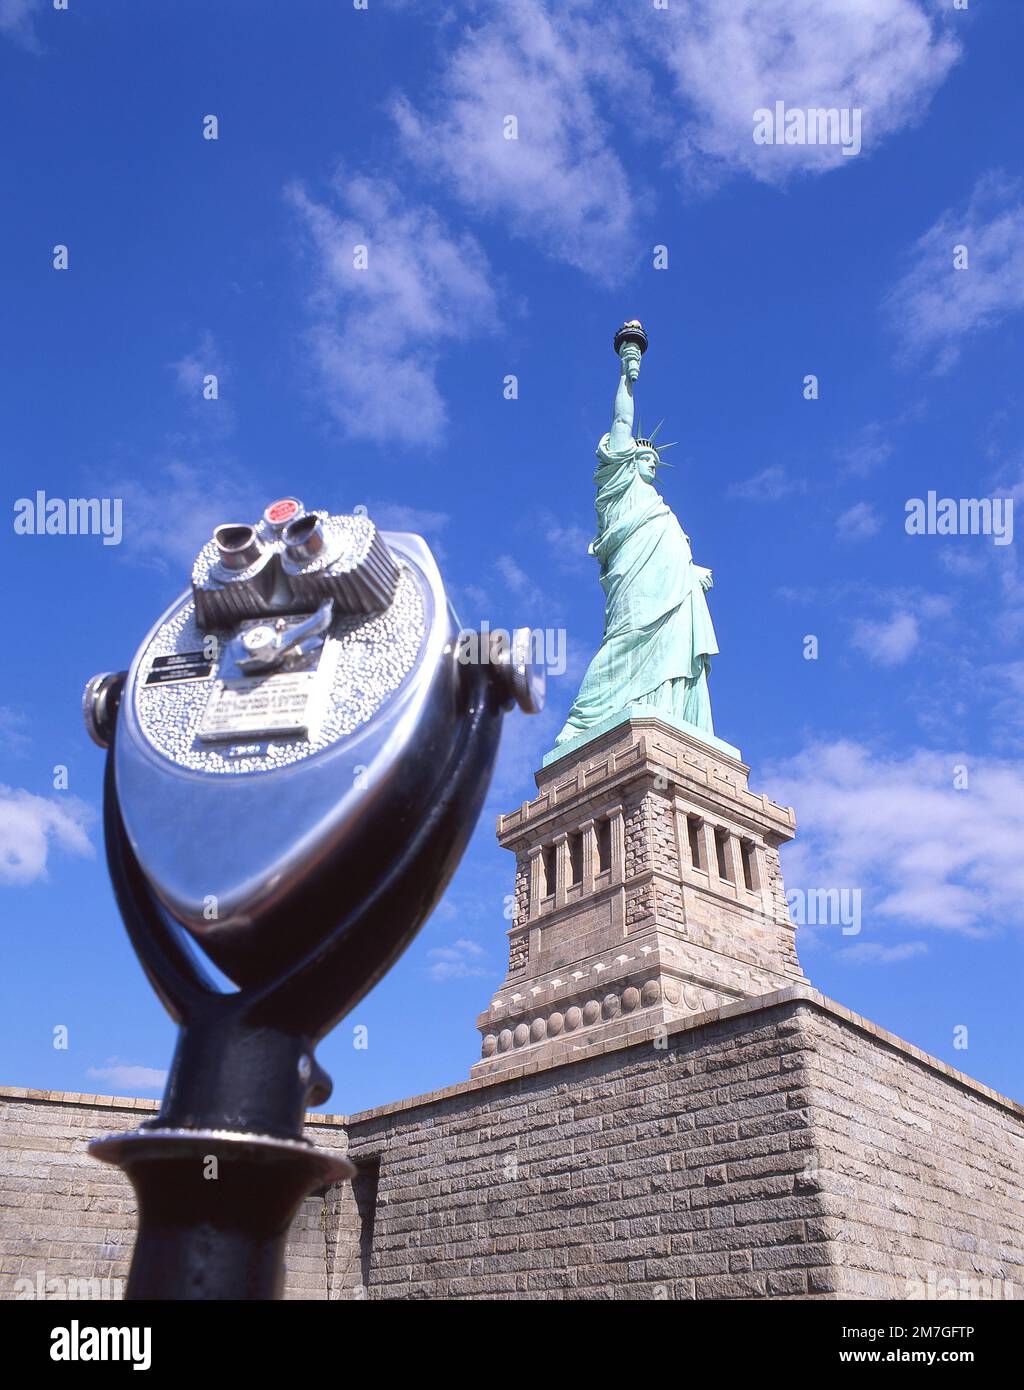 Tower Optical coin-operated binocular and Statue of Liberty National Monument, Liberty Island, New York, New York State, United States of America Stock Photo